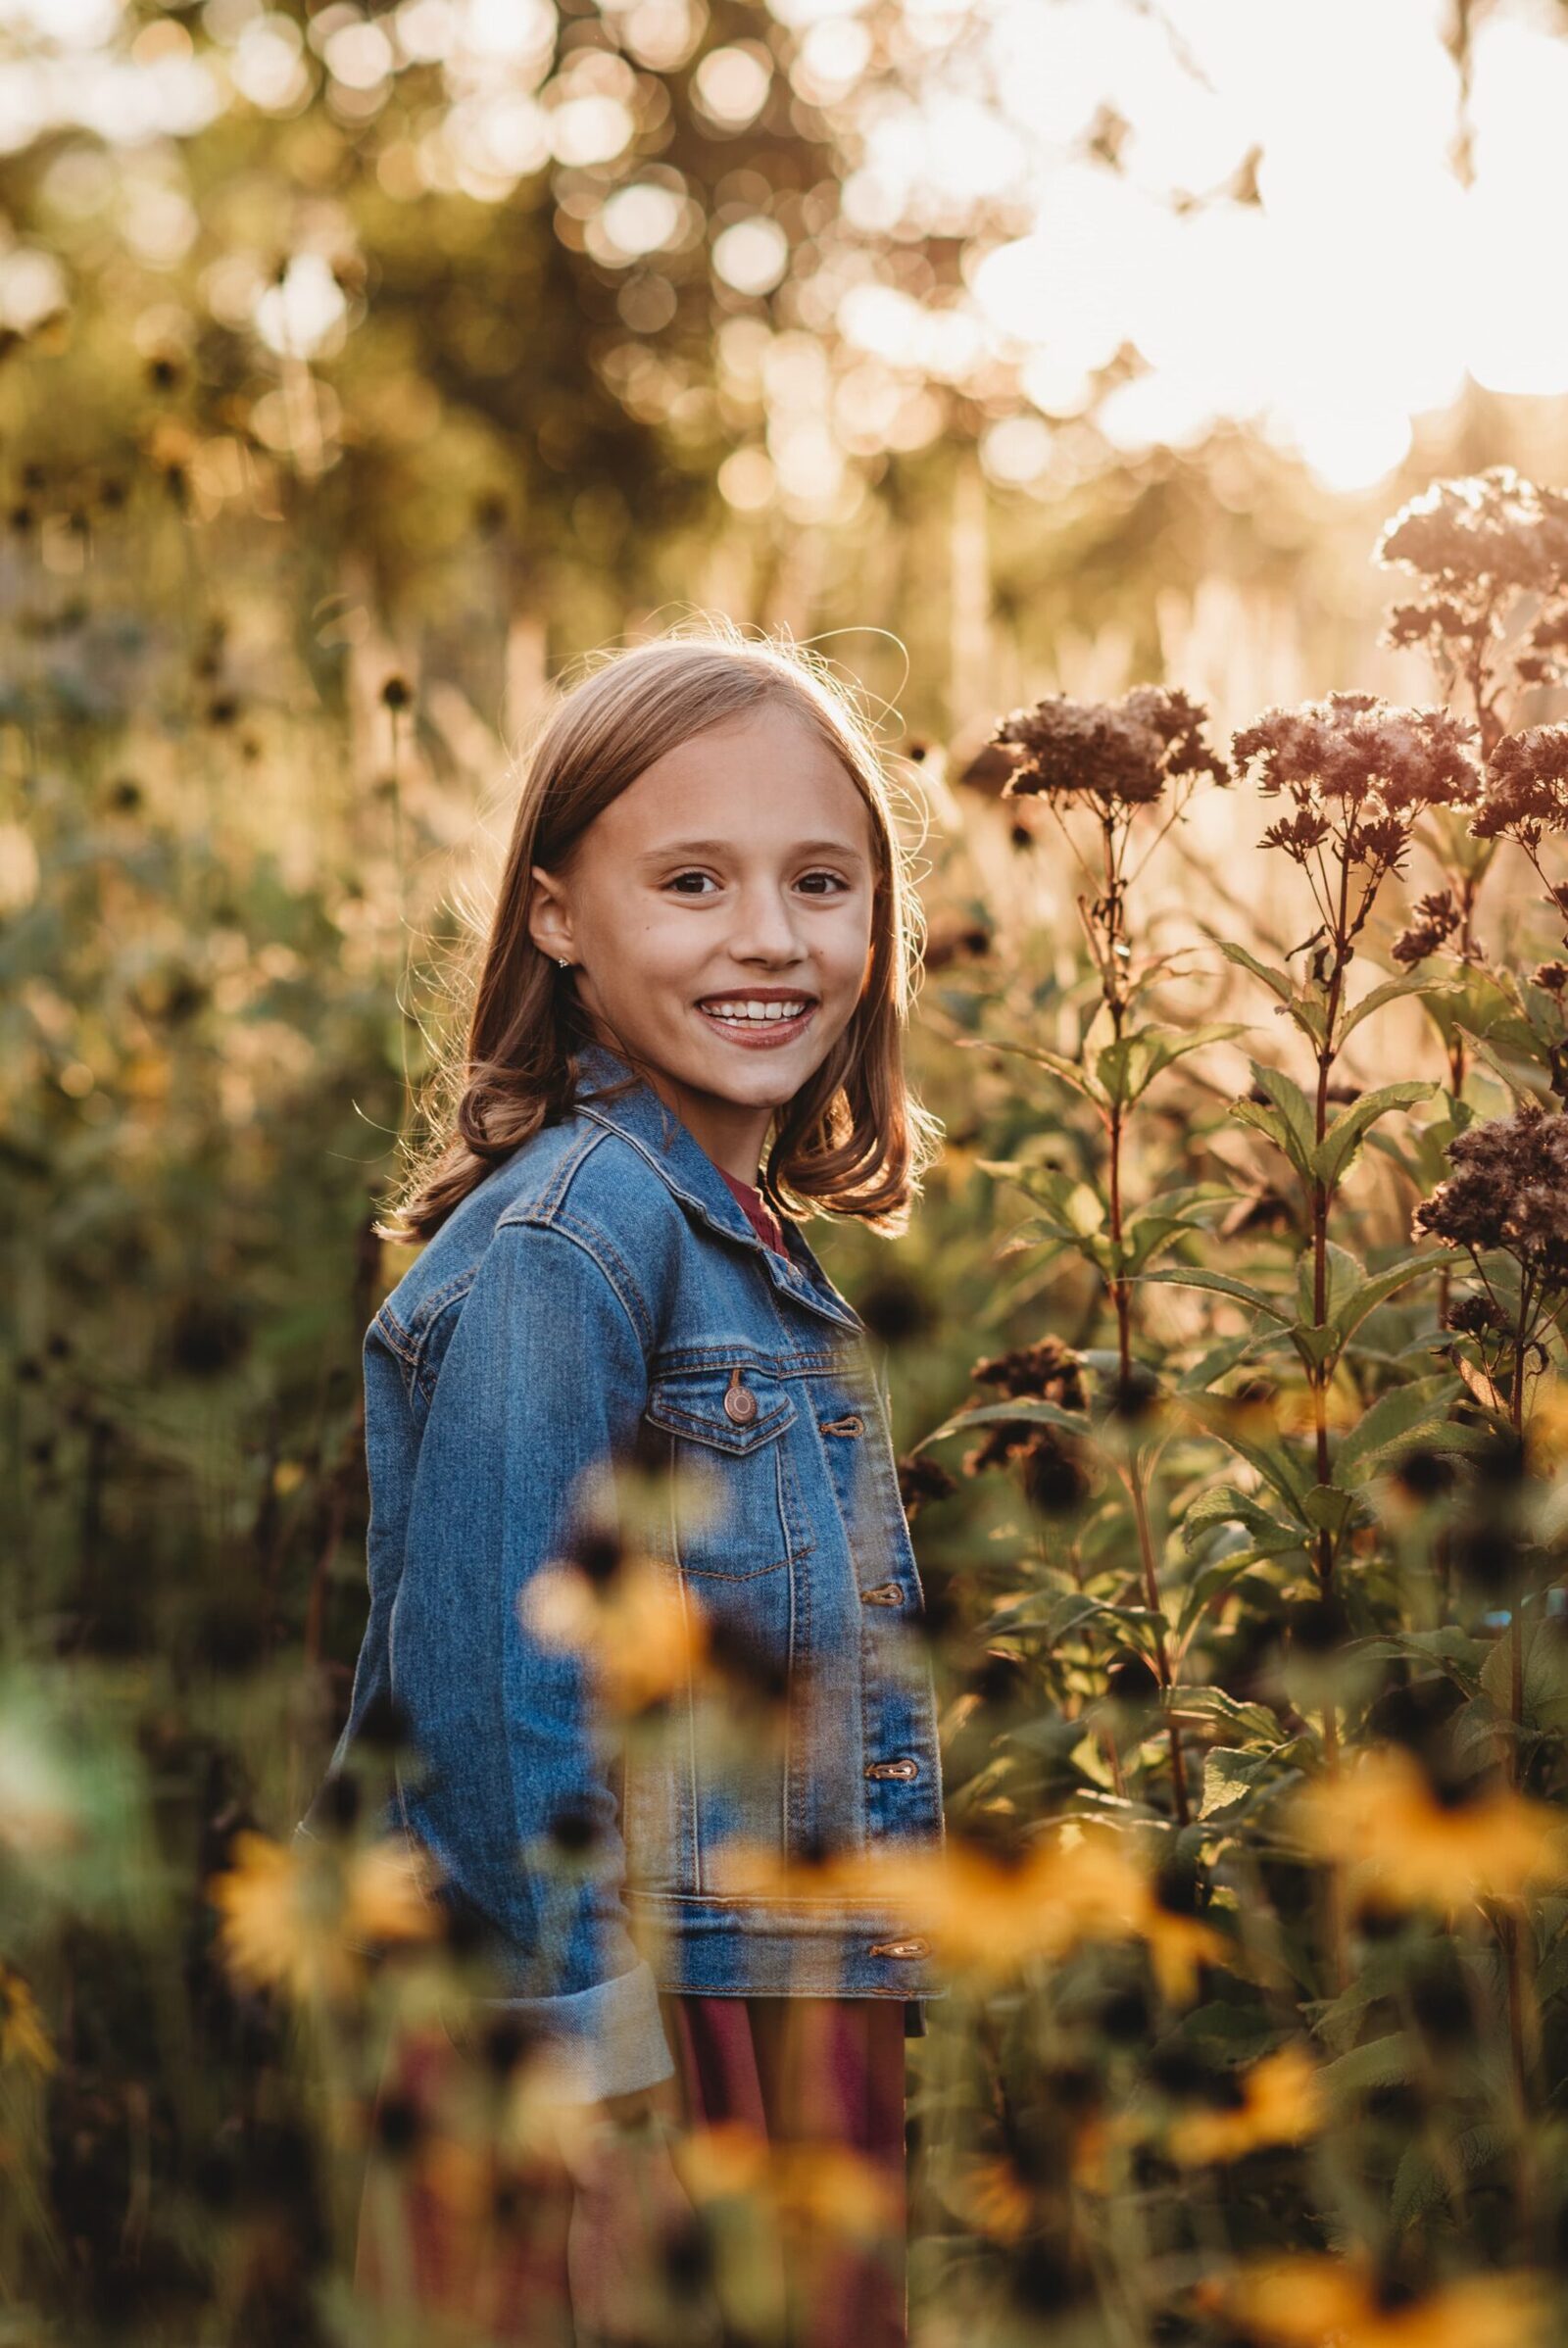 young girl in denim jacket standing in a flower garden with glowing sun in the background